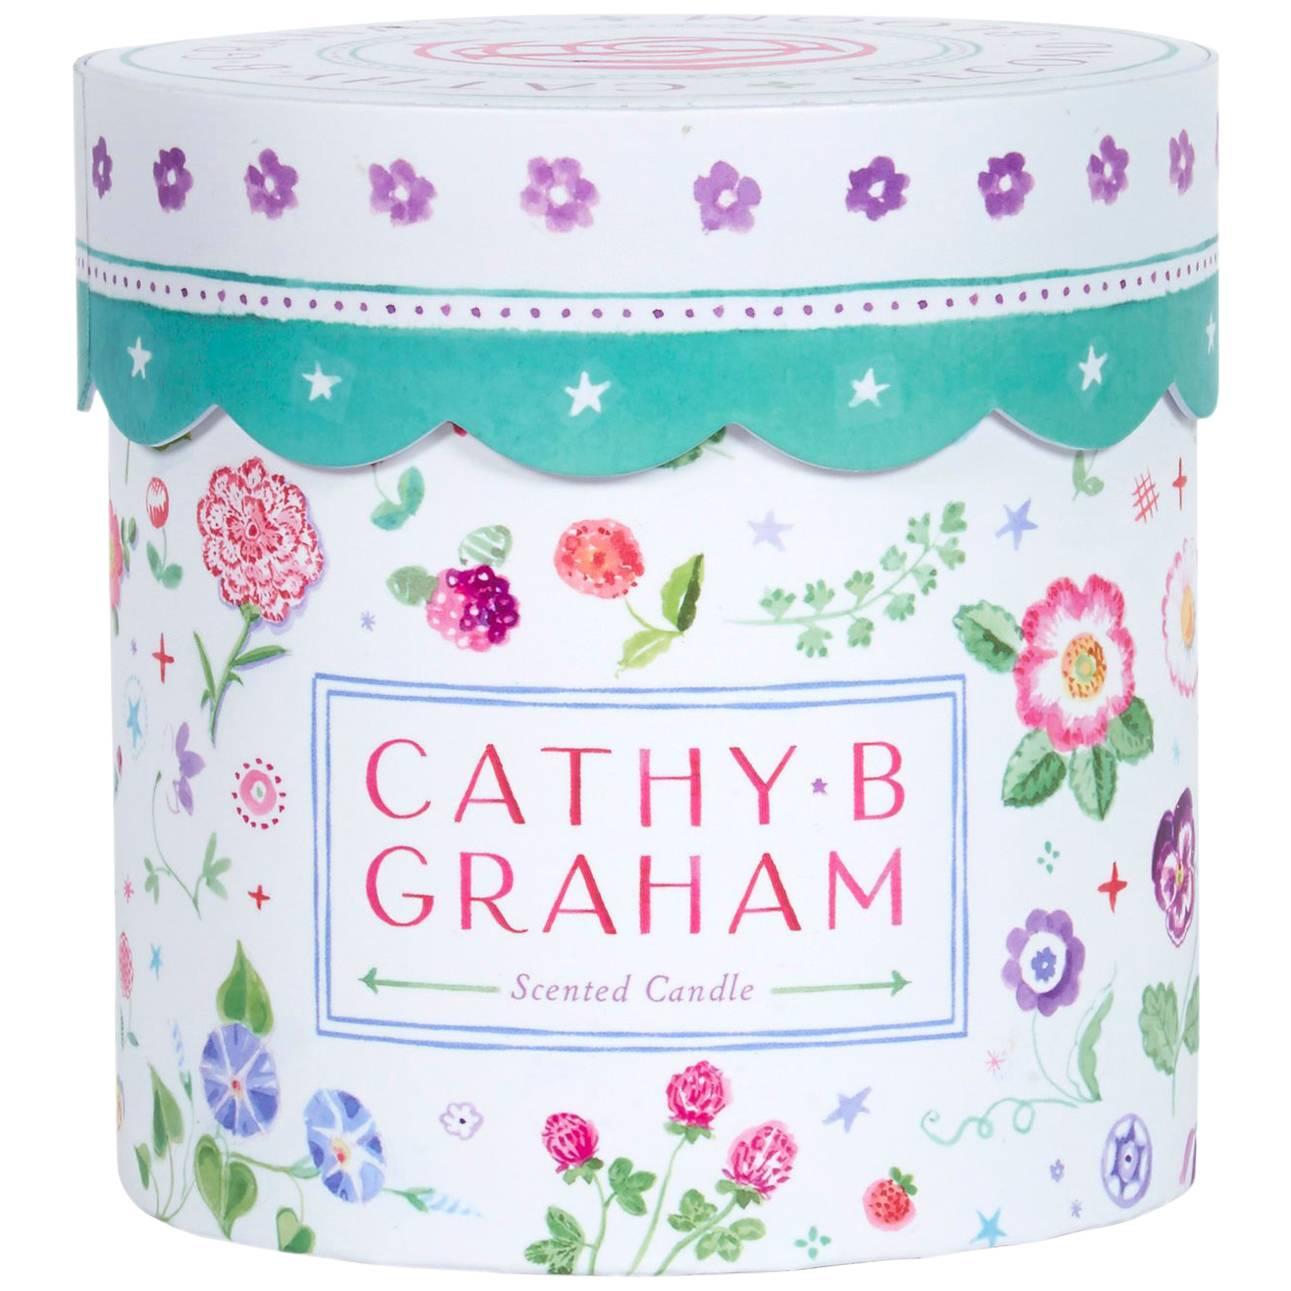 Cathy Graham Custom Designed Candle For Sale